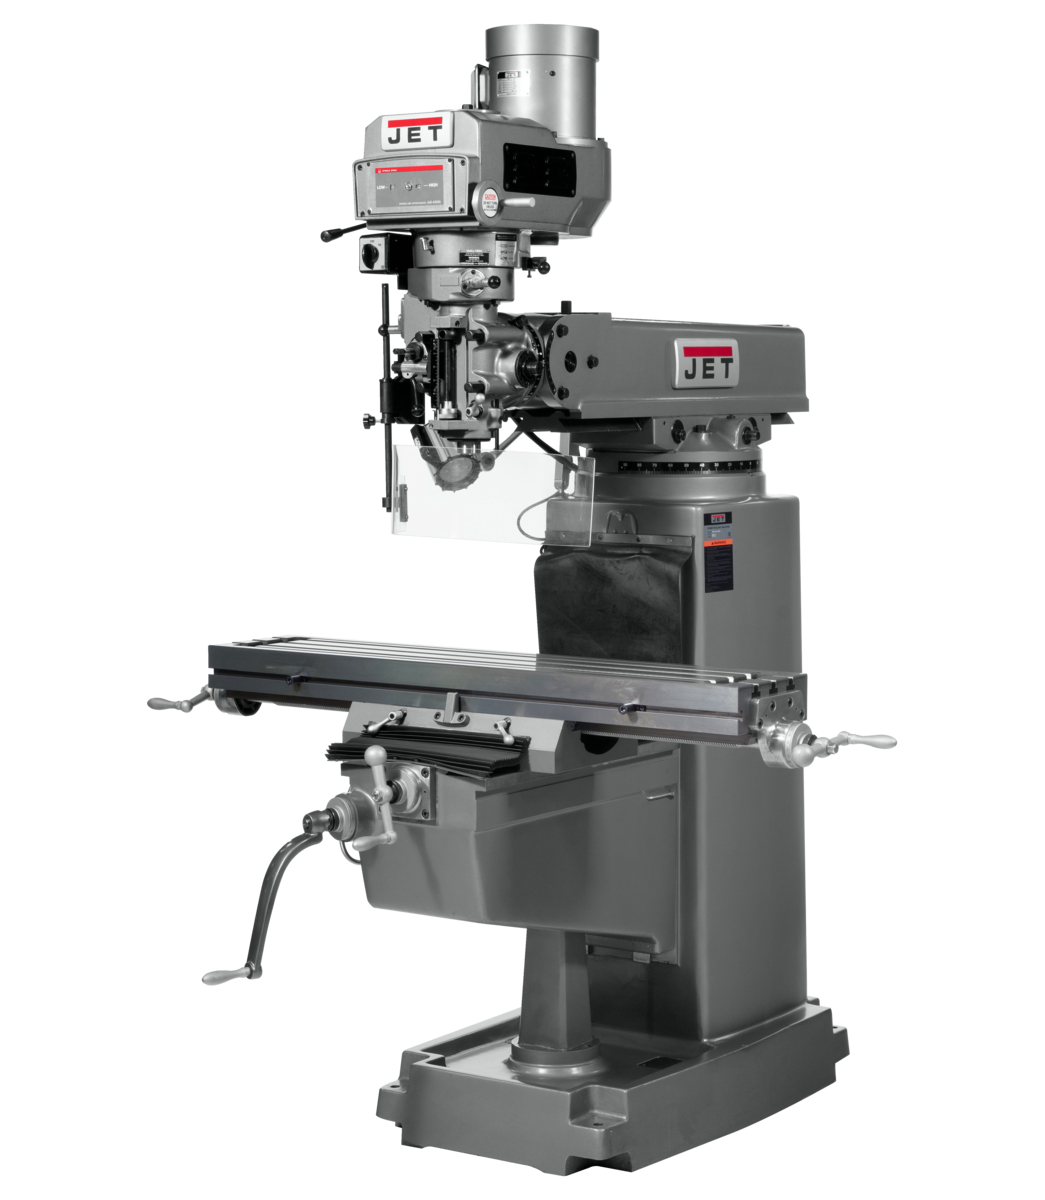 690450, The Jet JTM-1050 Mill With ACU-RITE VUE DRO With X, Y and Z-Axis Powerfeeds  in Metalworking, Milling, Vertical Mills